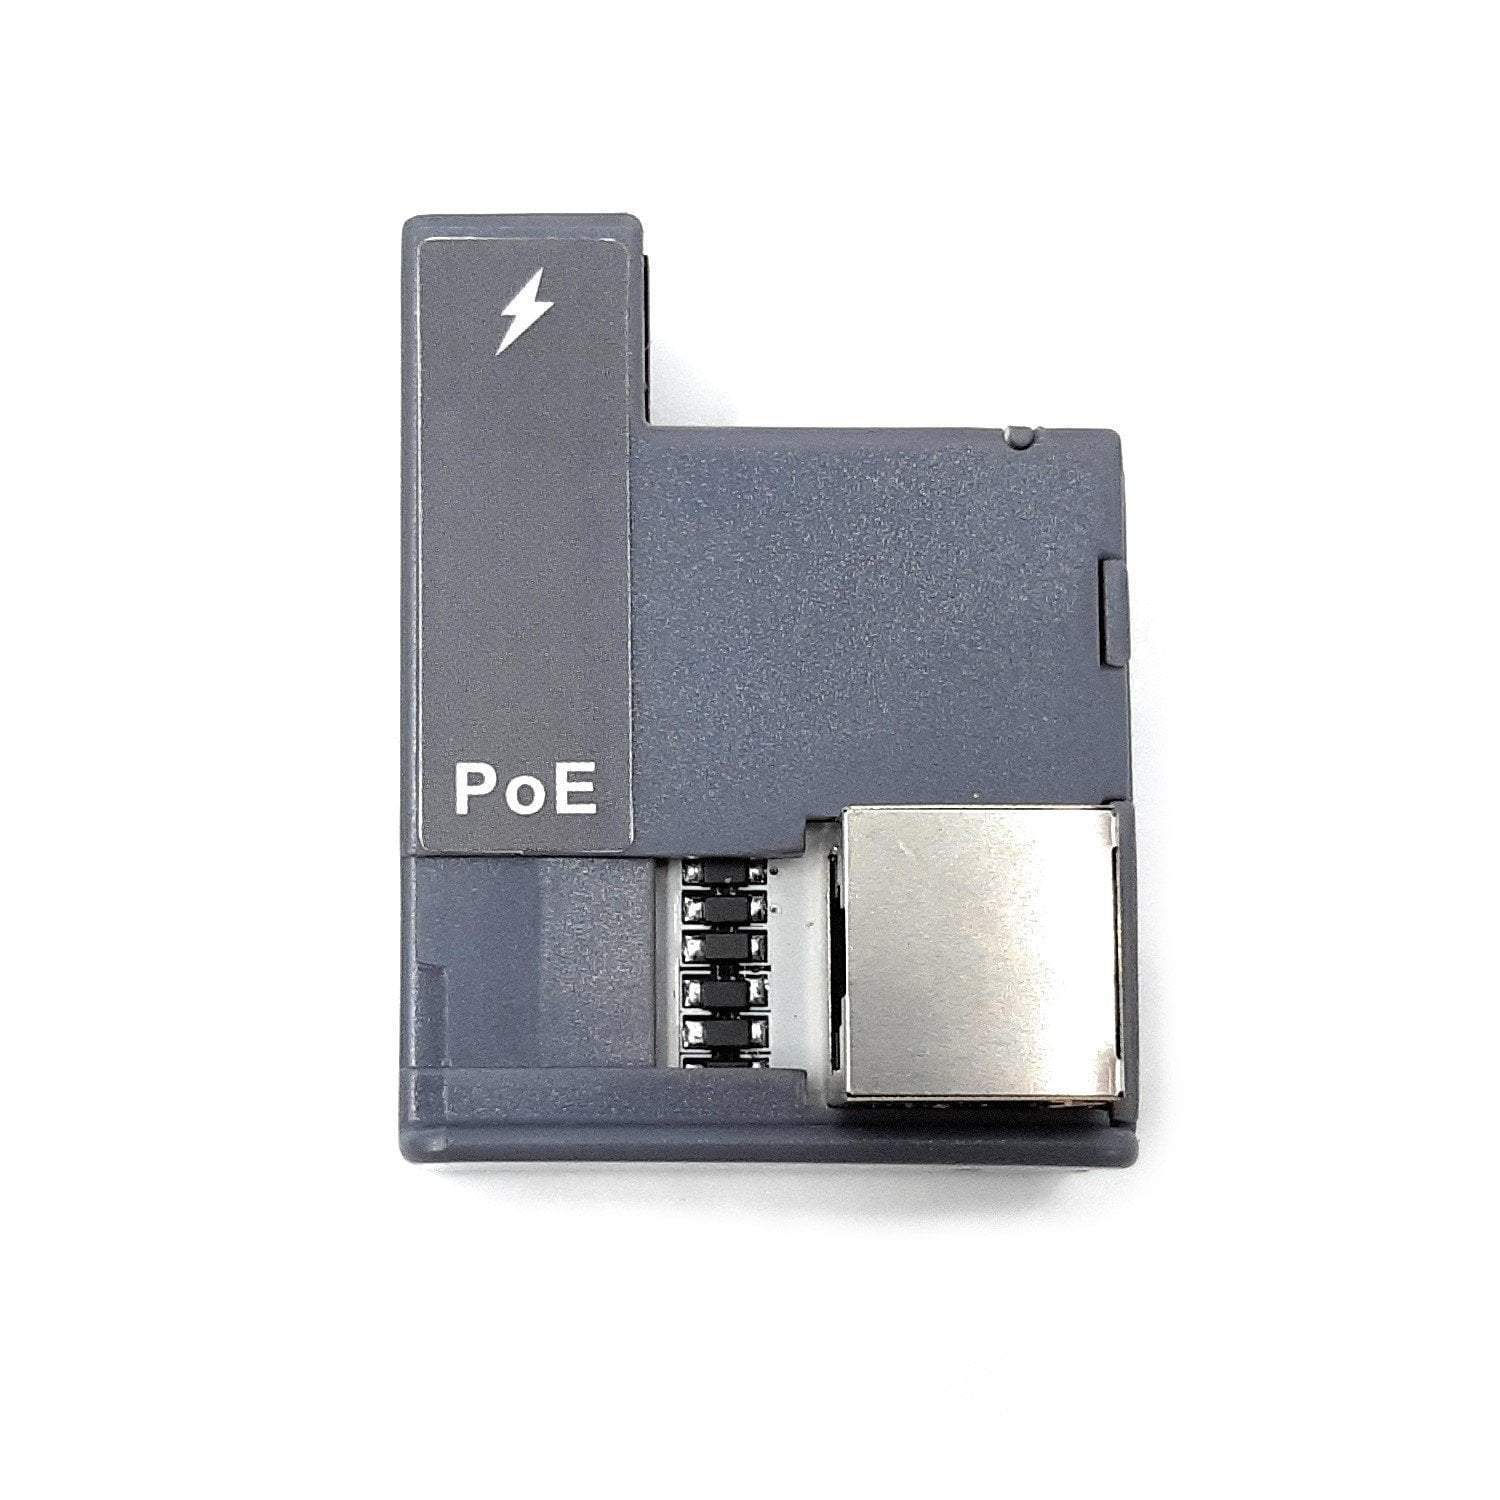 POE Texas Splitter POE+ to USB-C Power and Data Delivery with 25 Watt Output for iPad Pro, Surface Go, Galaxy Tab and More - 10/100 Mbps